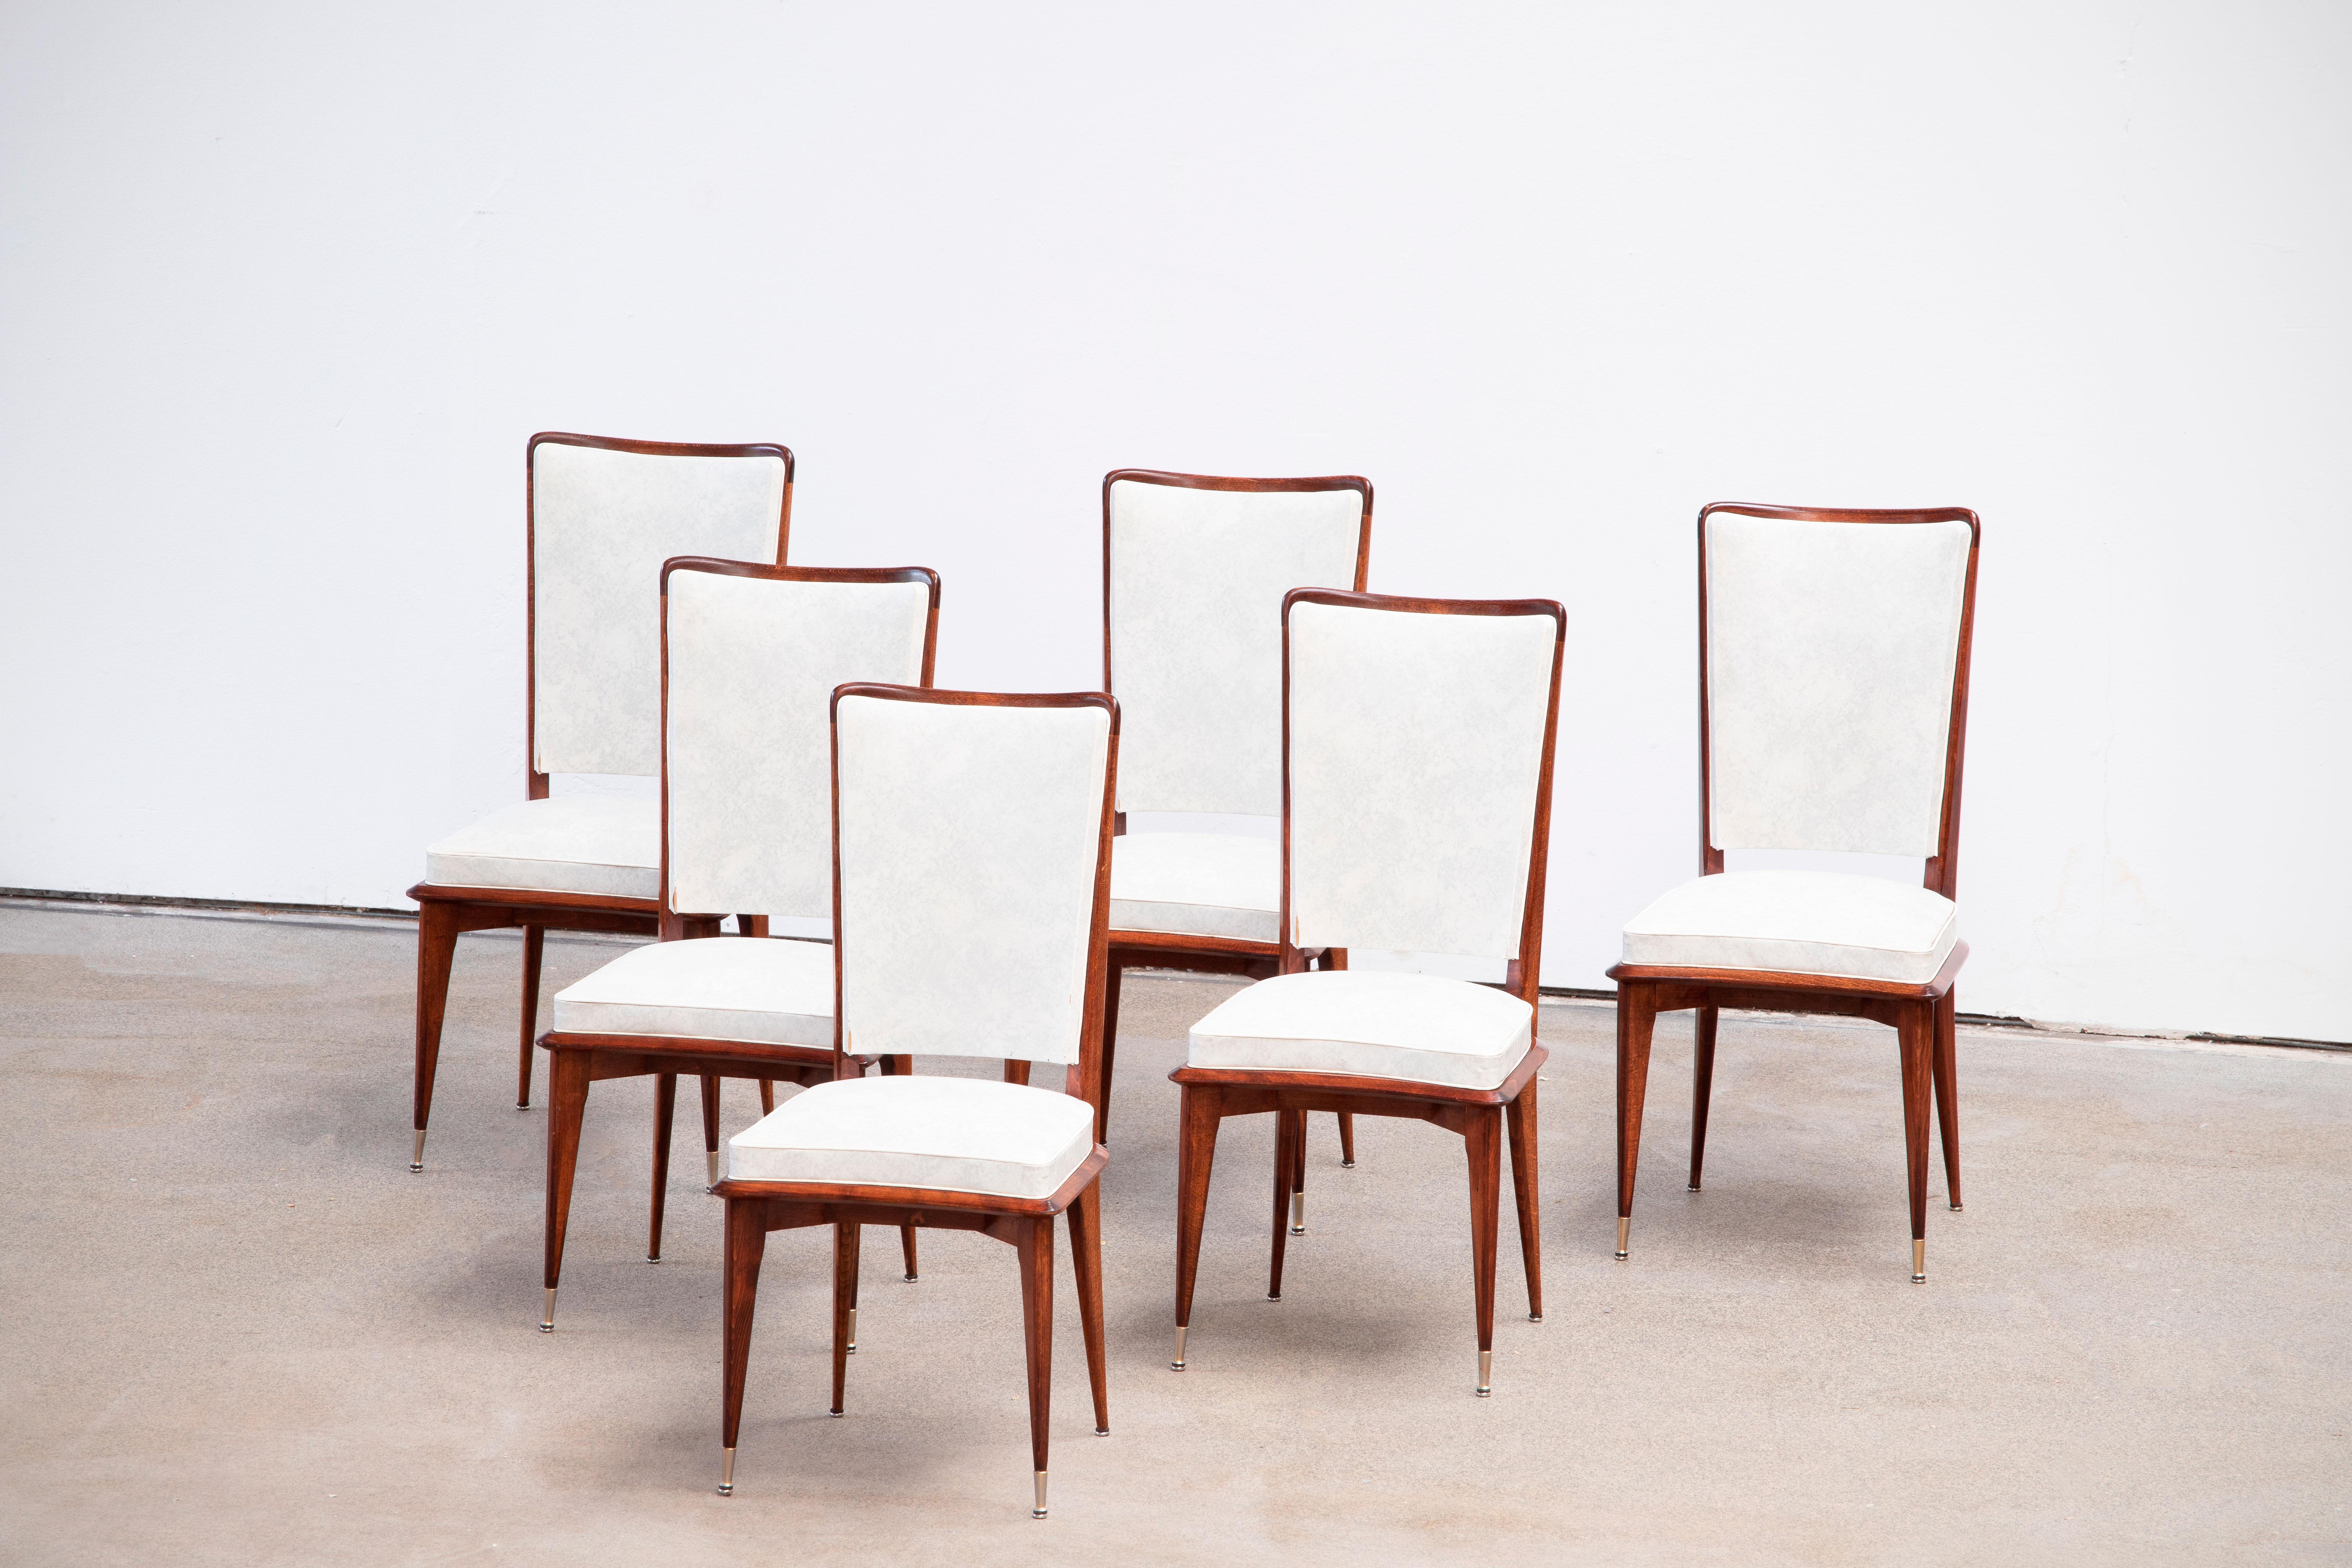 Set of six upholstered high back chairs covered in white vynil, exhibiting traditional French design elements in a deep oak finish. Restored and polished.